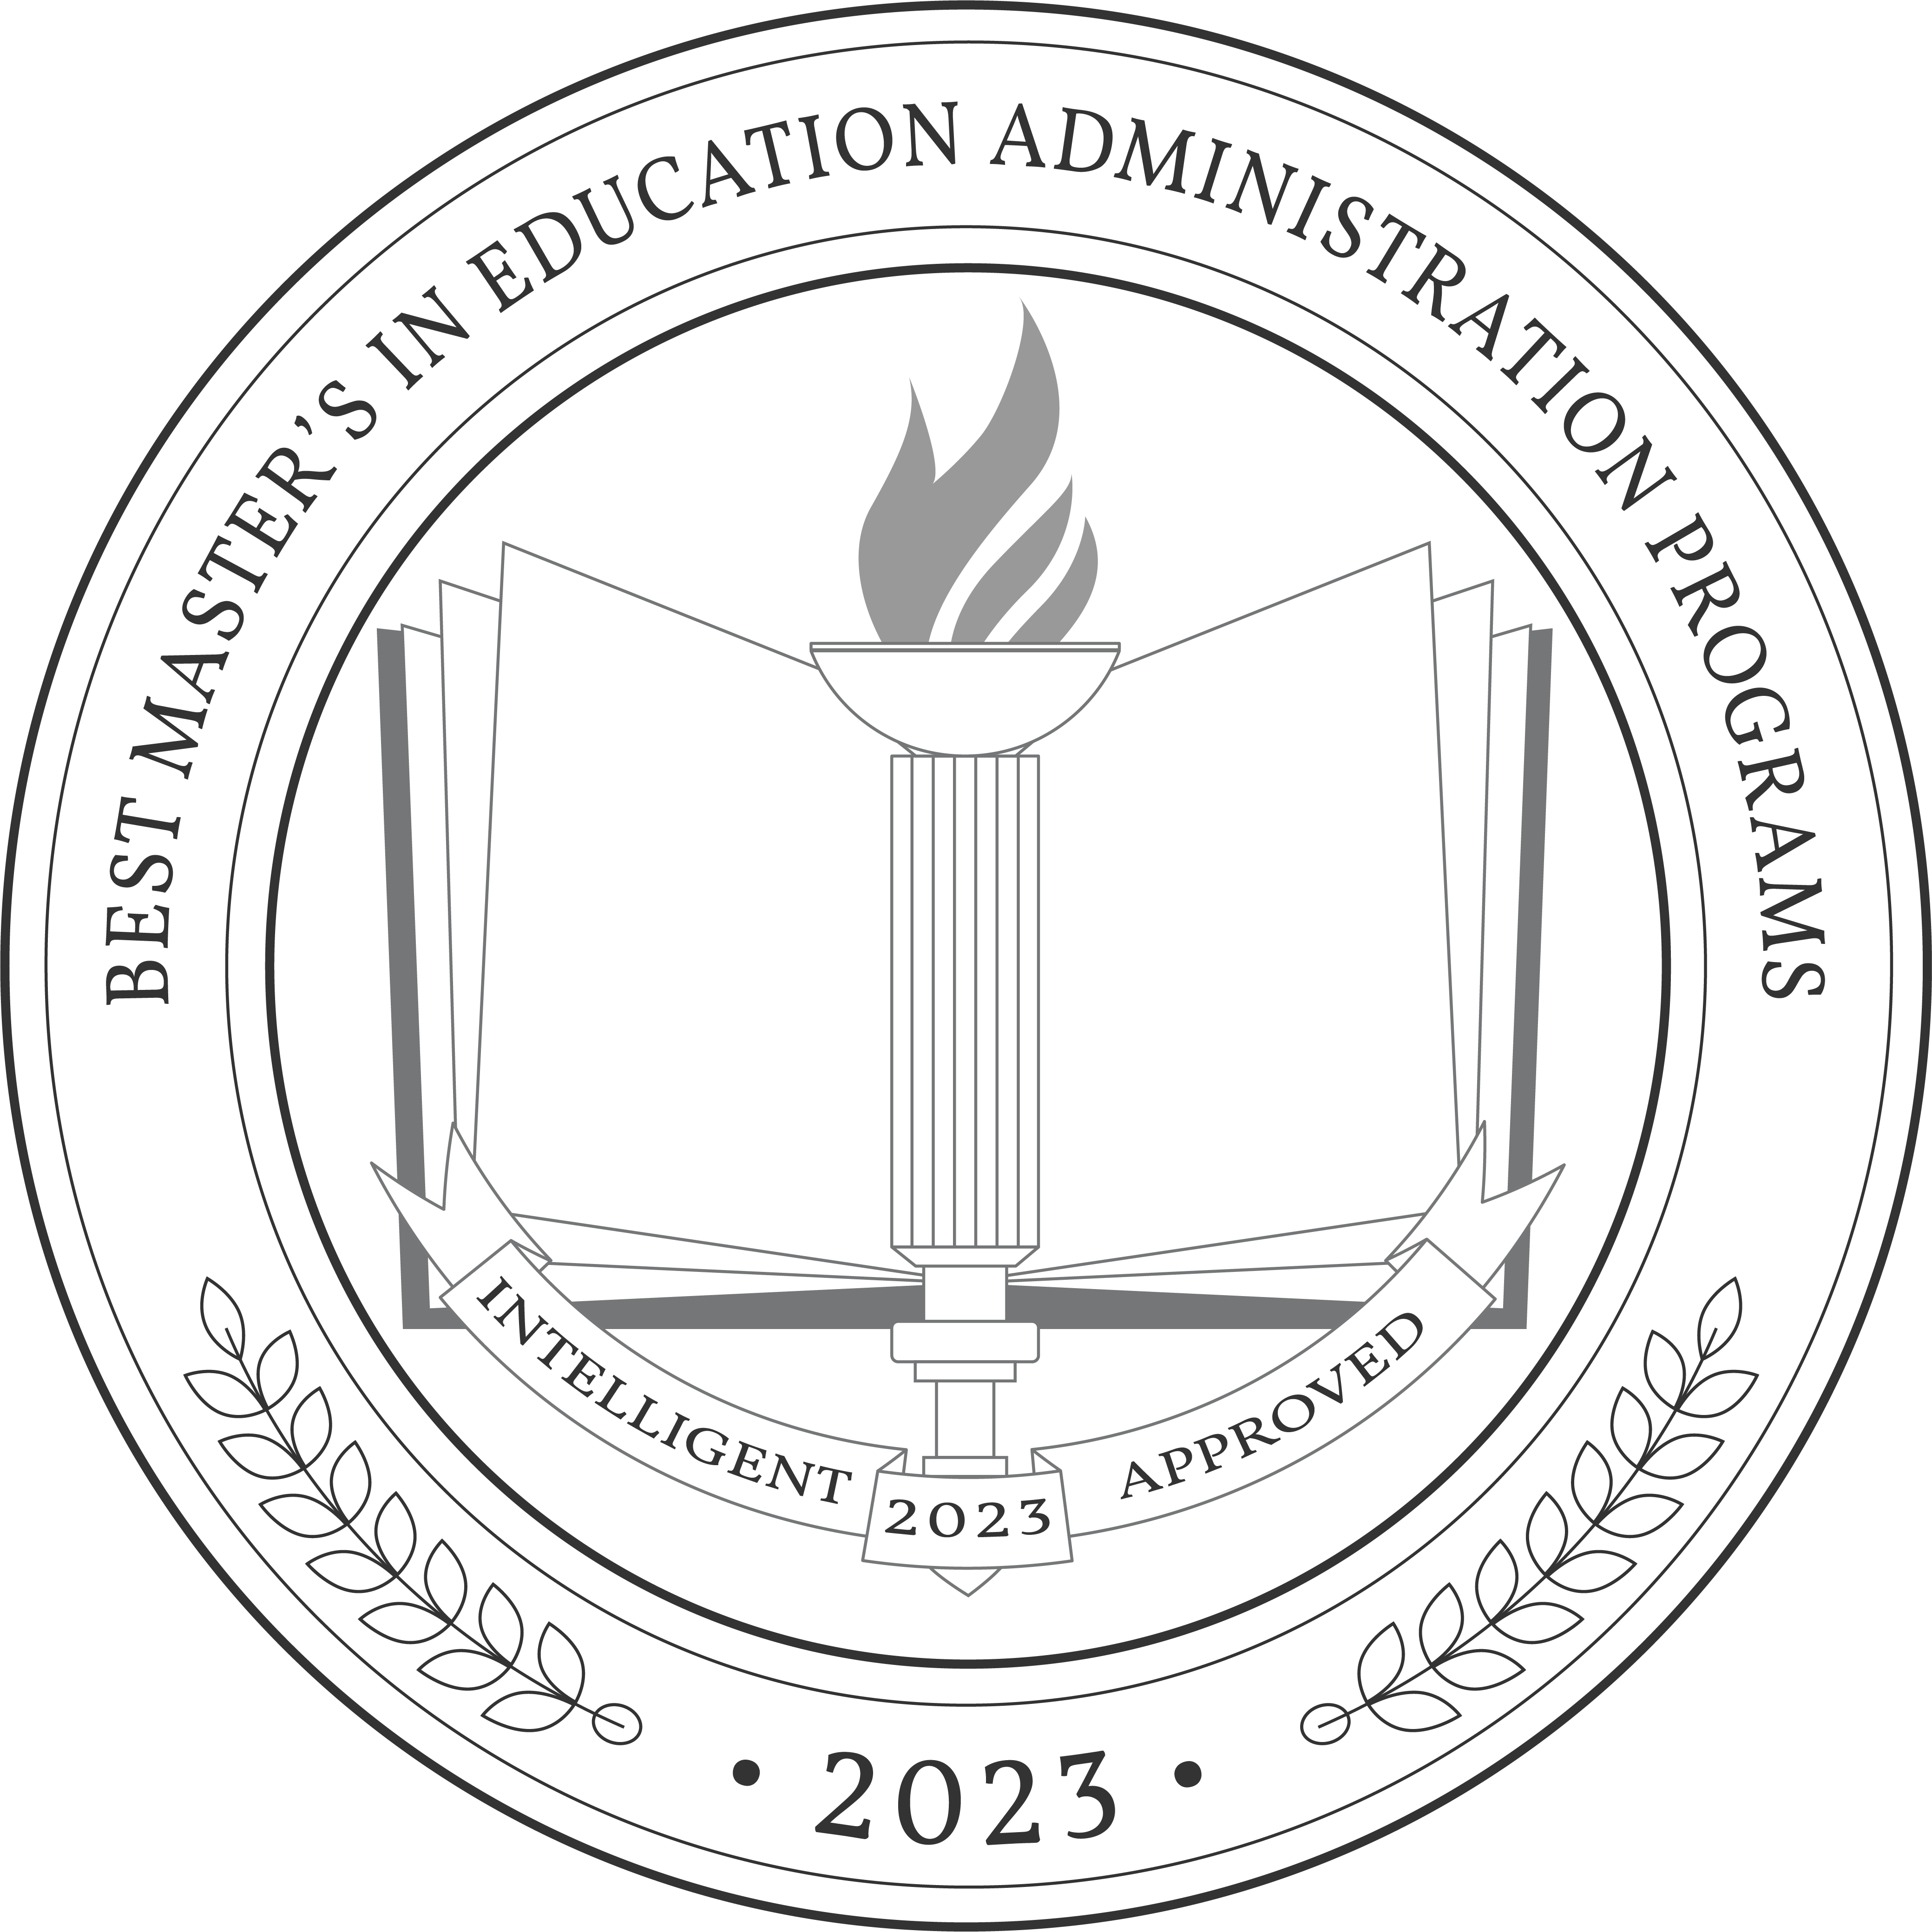 Best Master's in Education Administration Programs badge